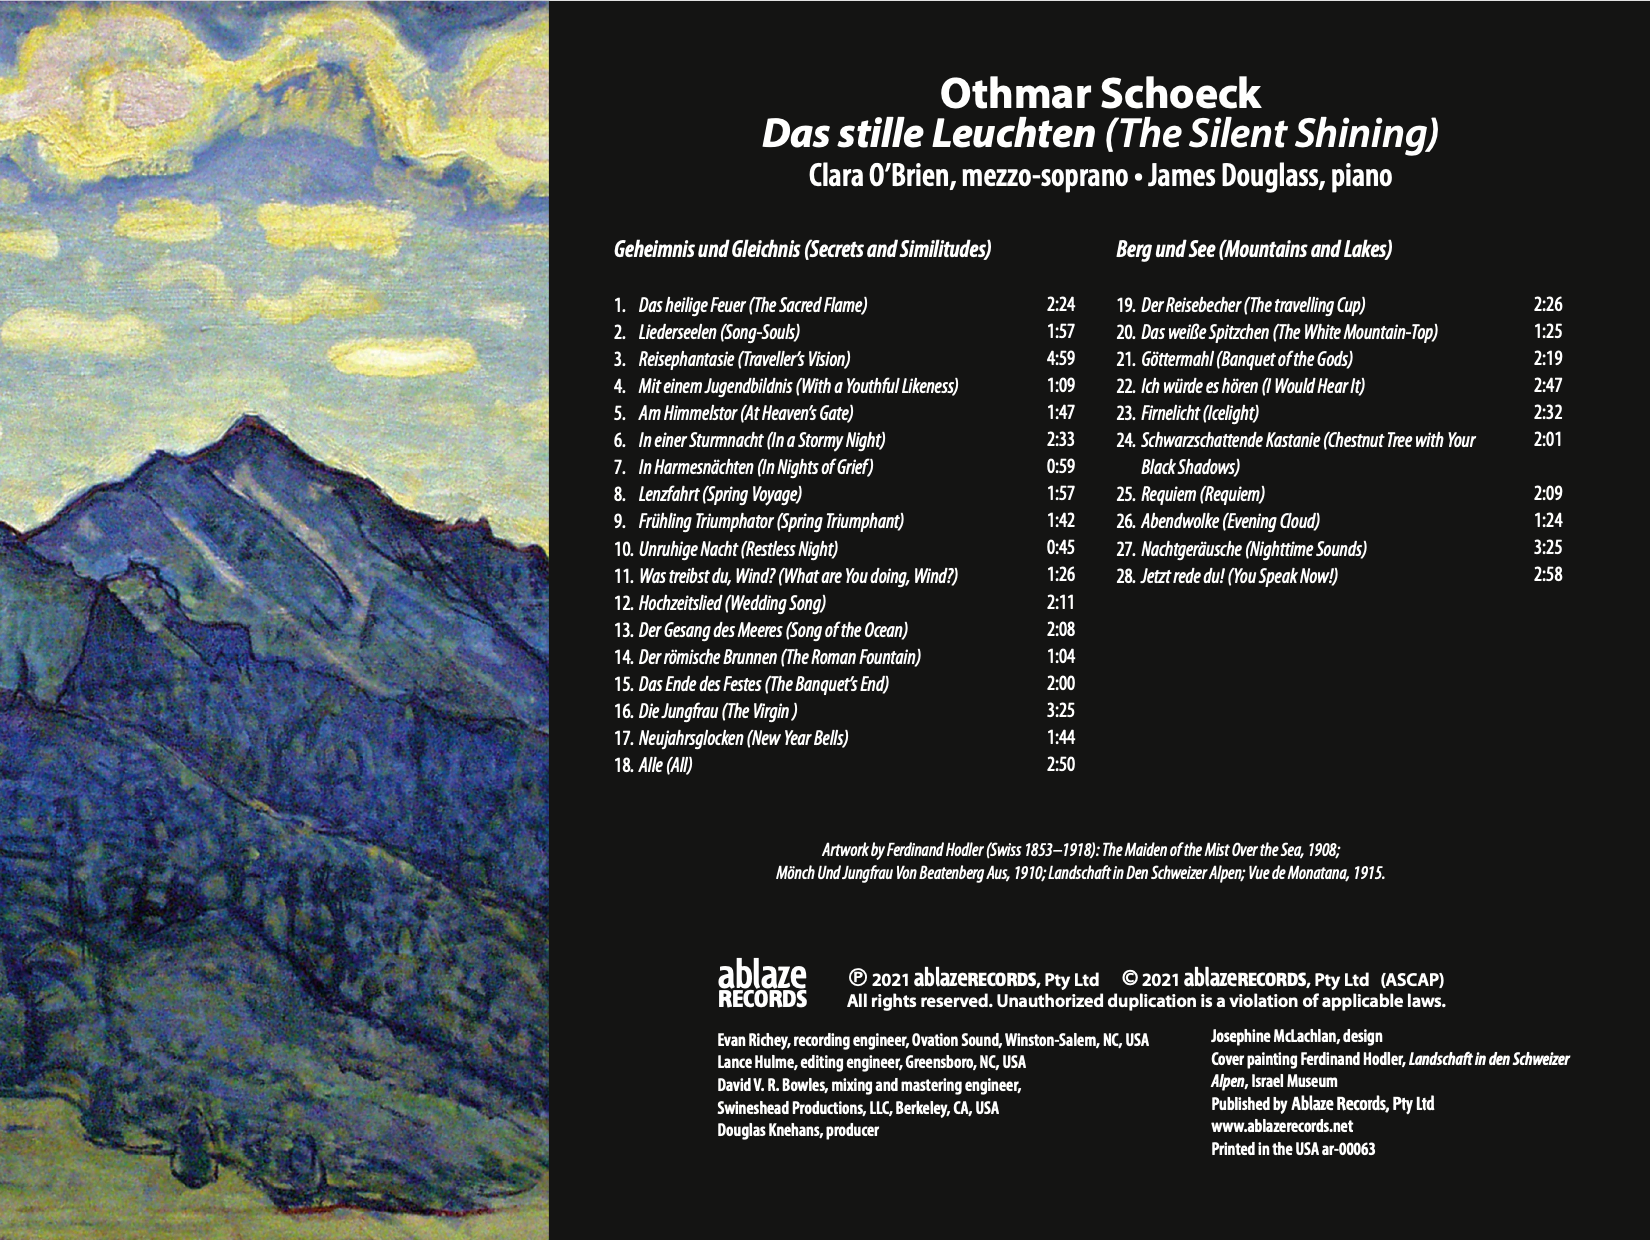 schoeck_booklet2 00031.png